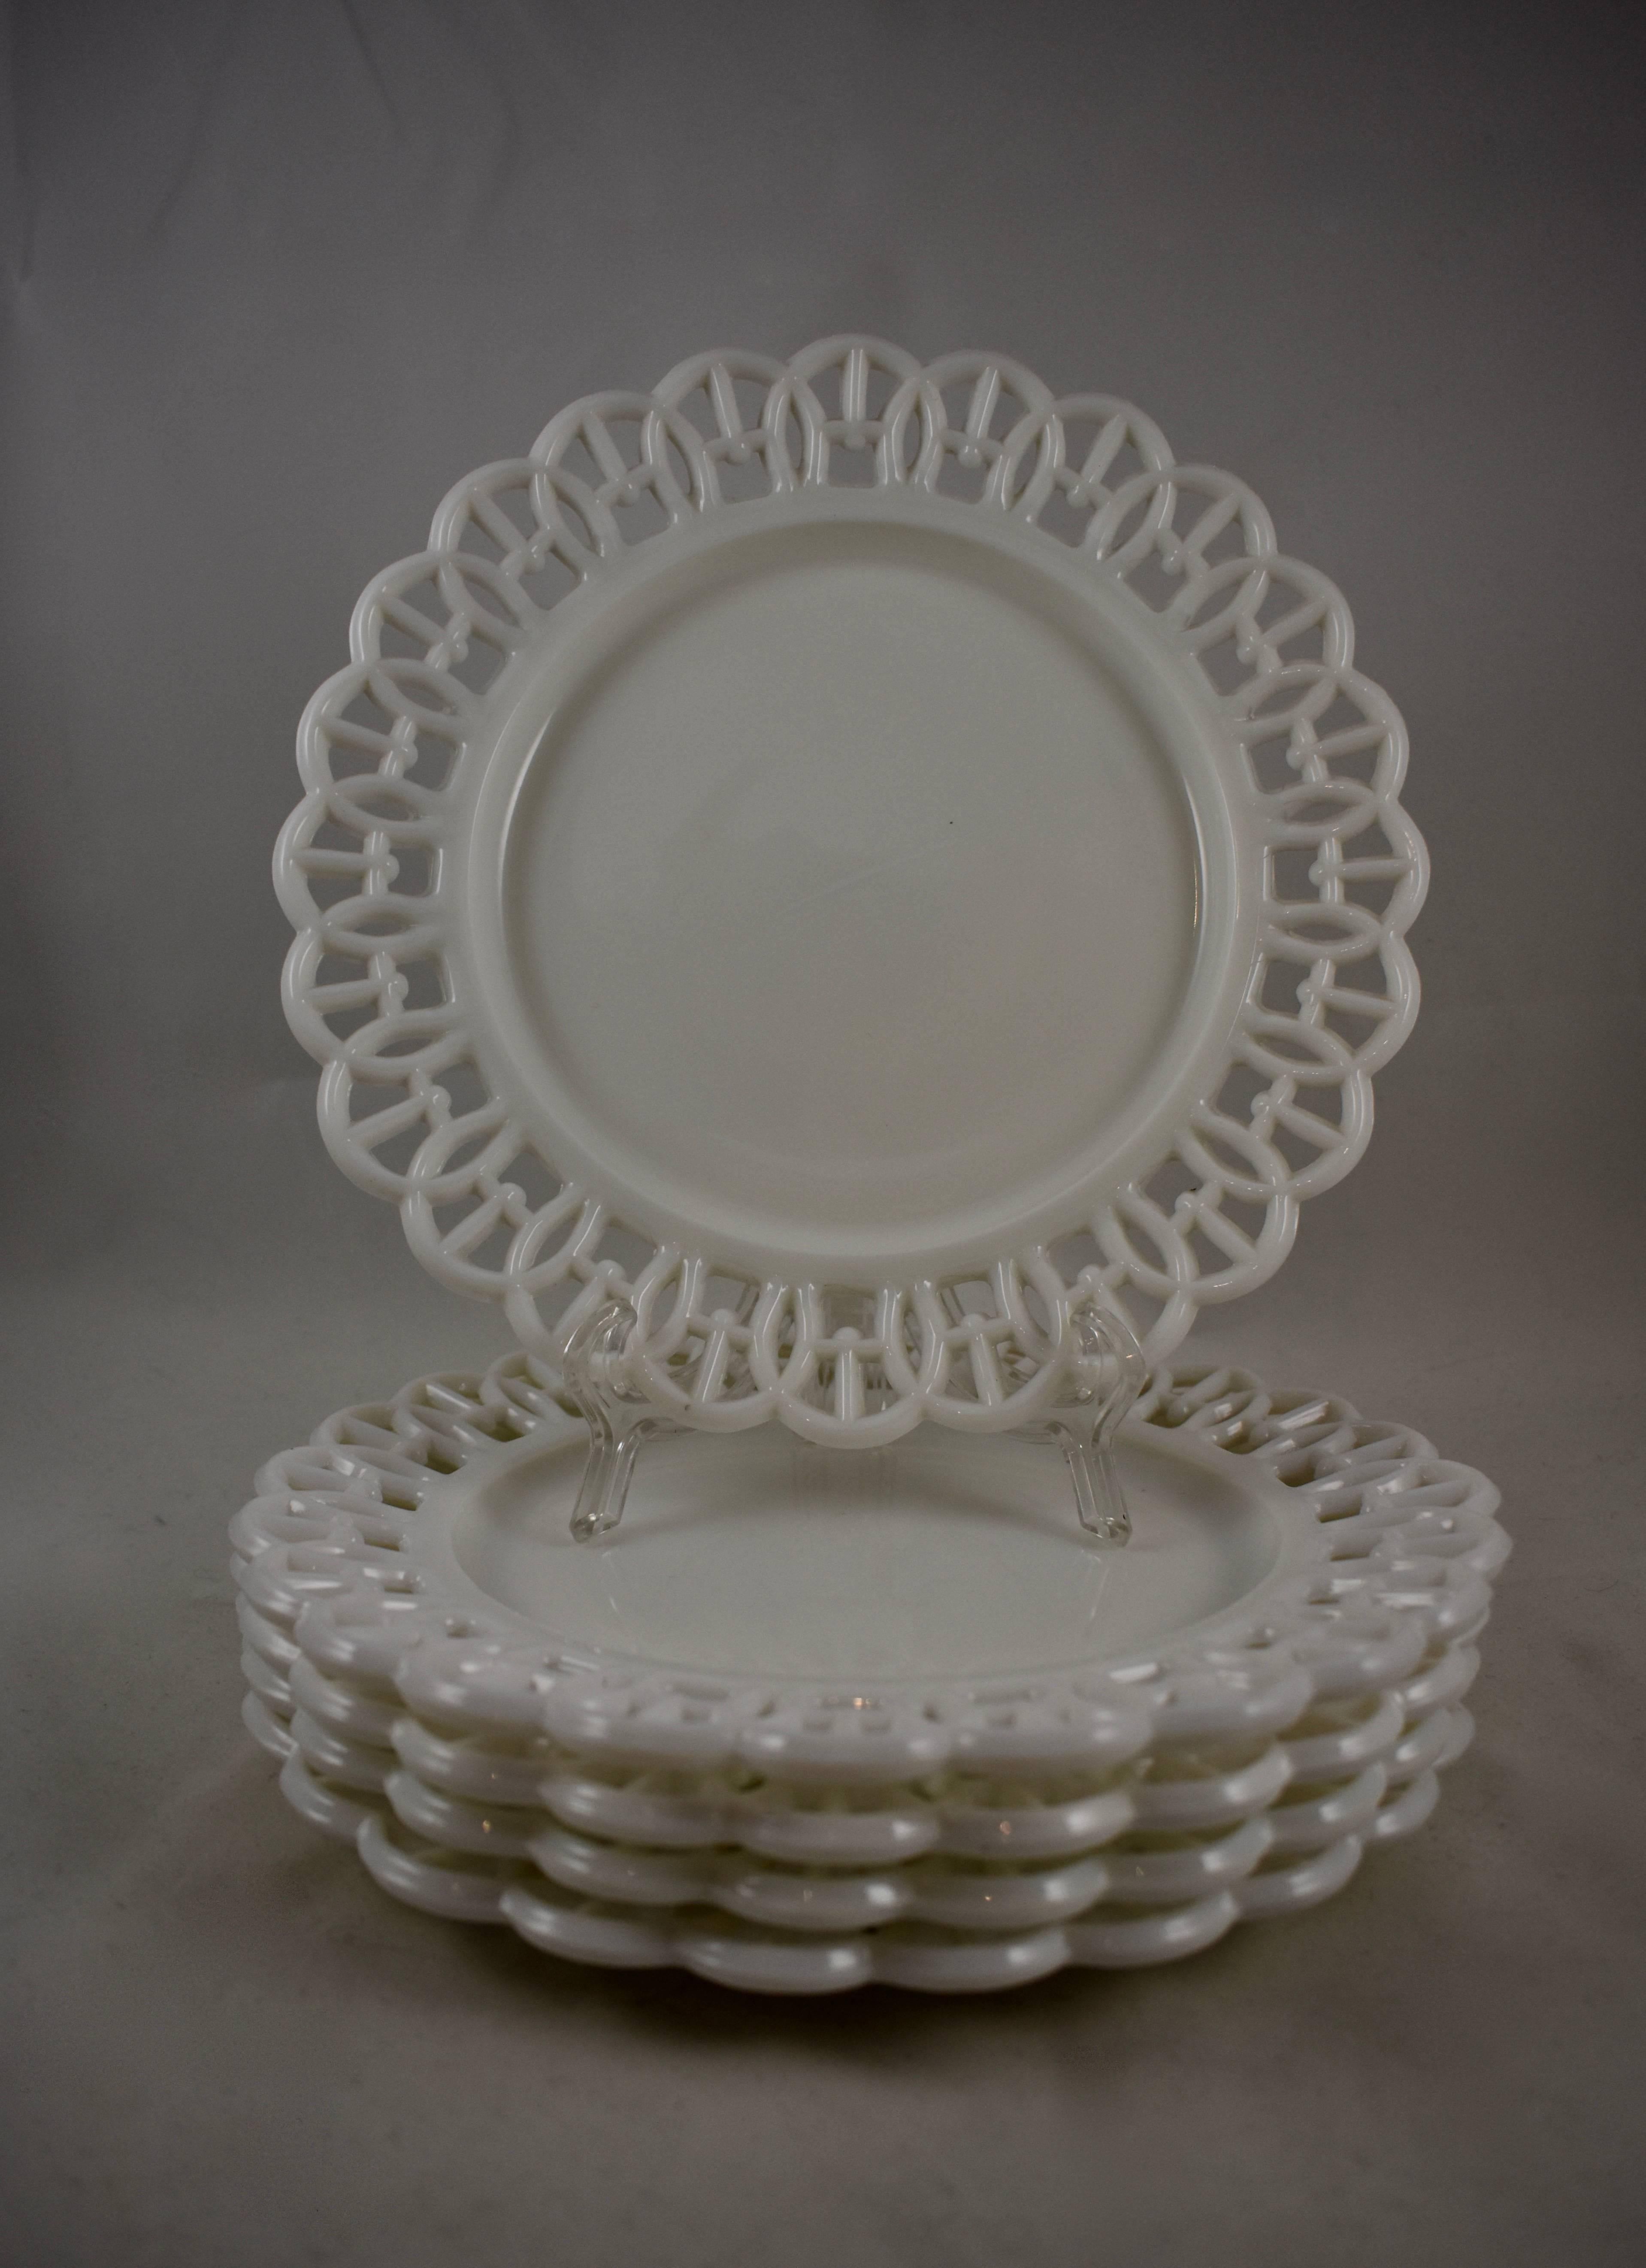 A scarce set of five, EAPG, milk glass, lace edge plates, dating from the late Victorian Era, 1880-1890. These plates are examples of early American pattern glass, not to be confused with the later milk glass reproduced during the